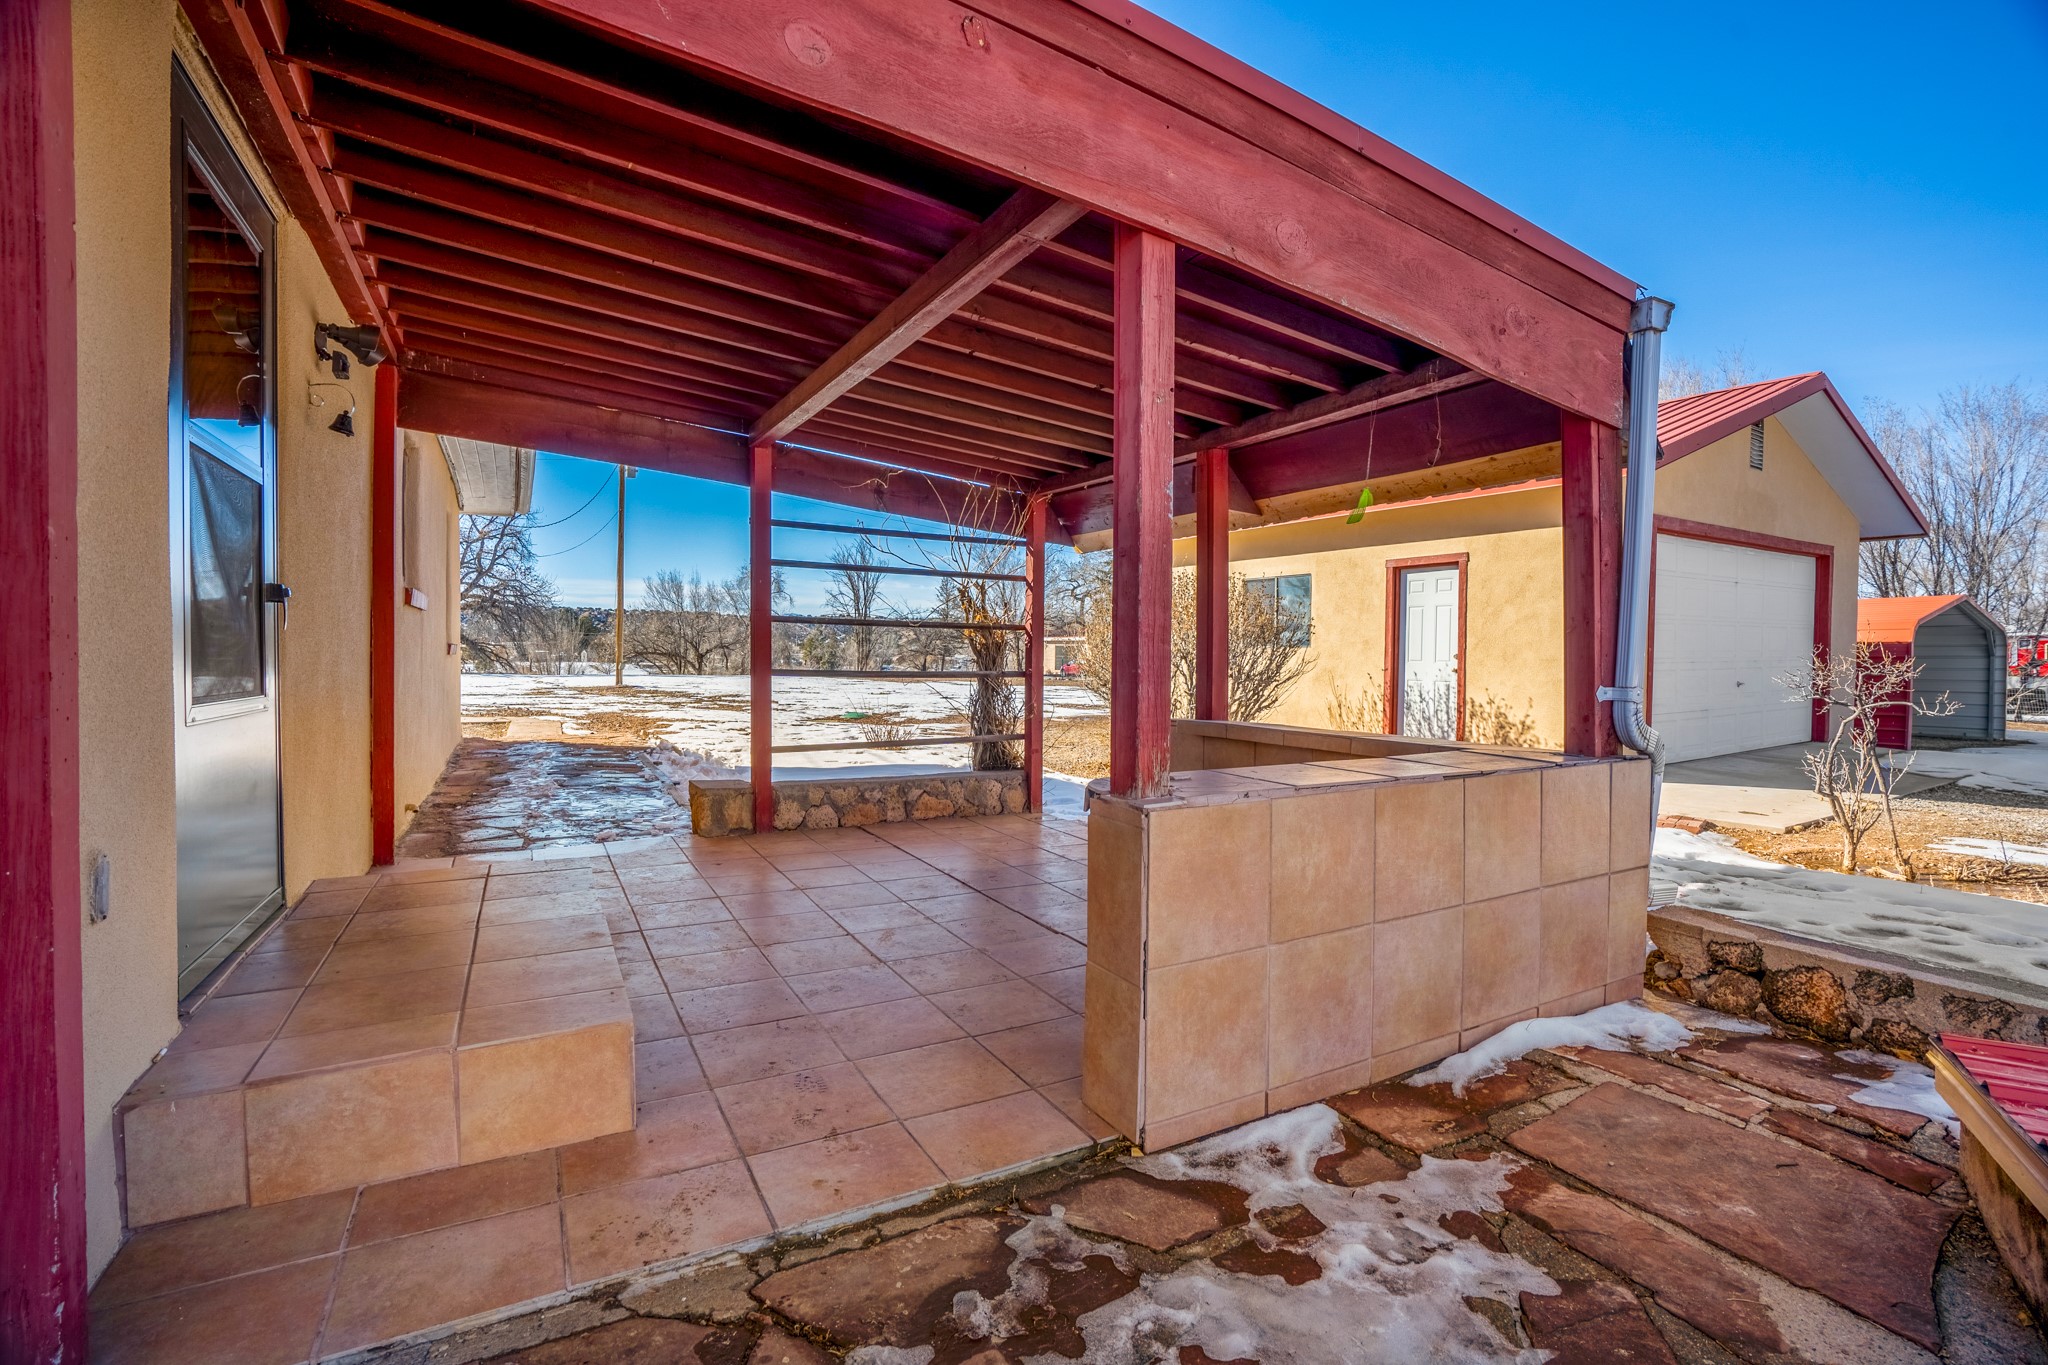 36 Sunlight View, Cuyamungue, New Mexico 87506, 3 Bedrooms Bedrooms, ,2 BathroomsBathrooms,Residential,For Sale,36 Sunlight View,202341892